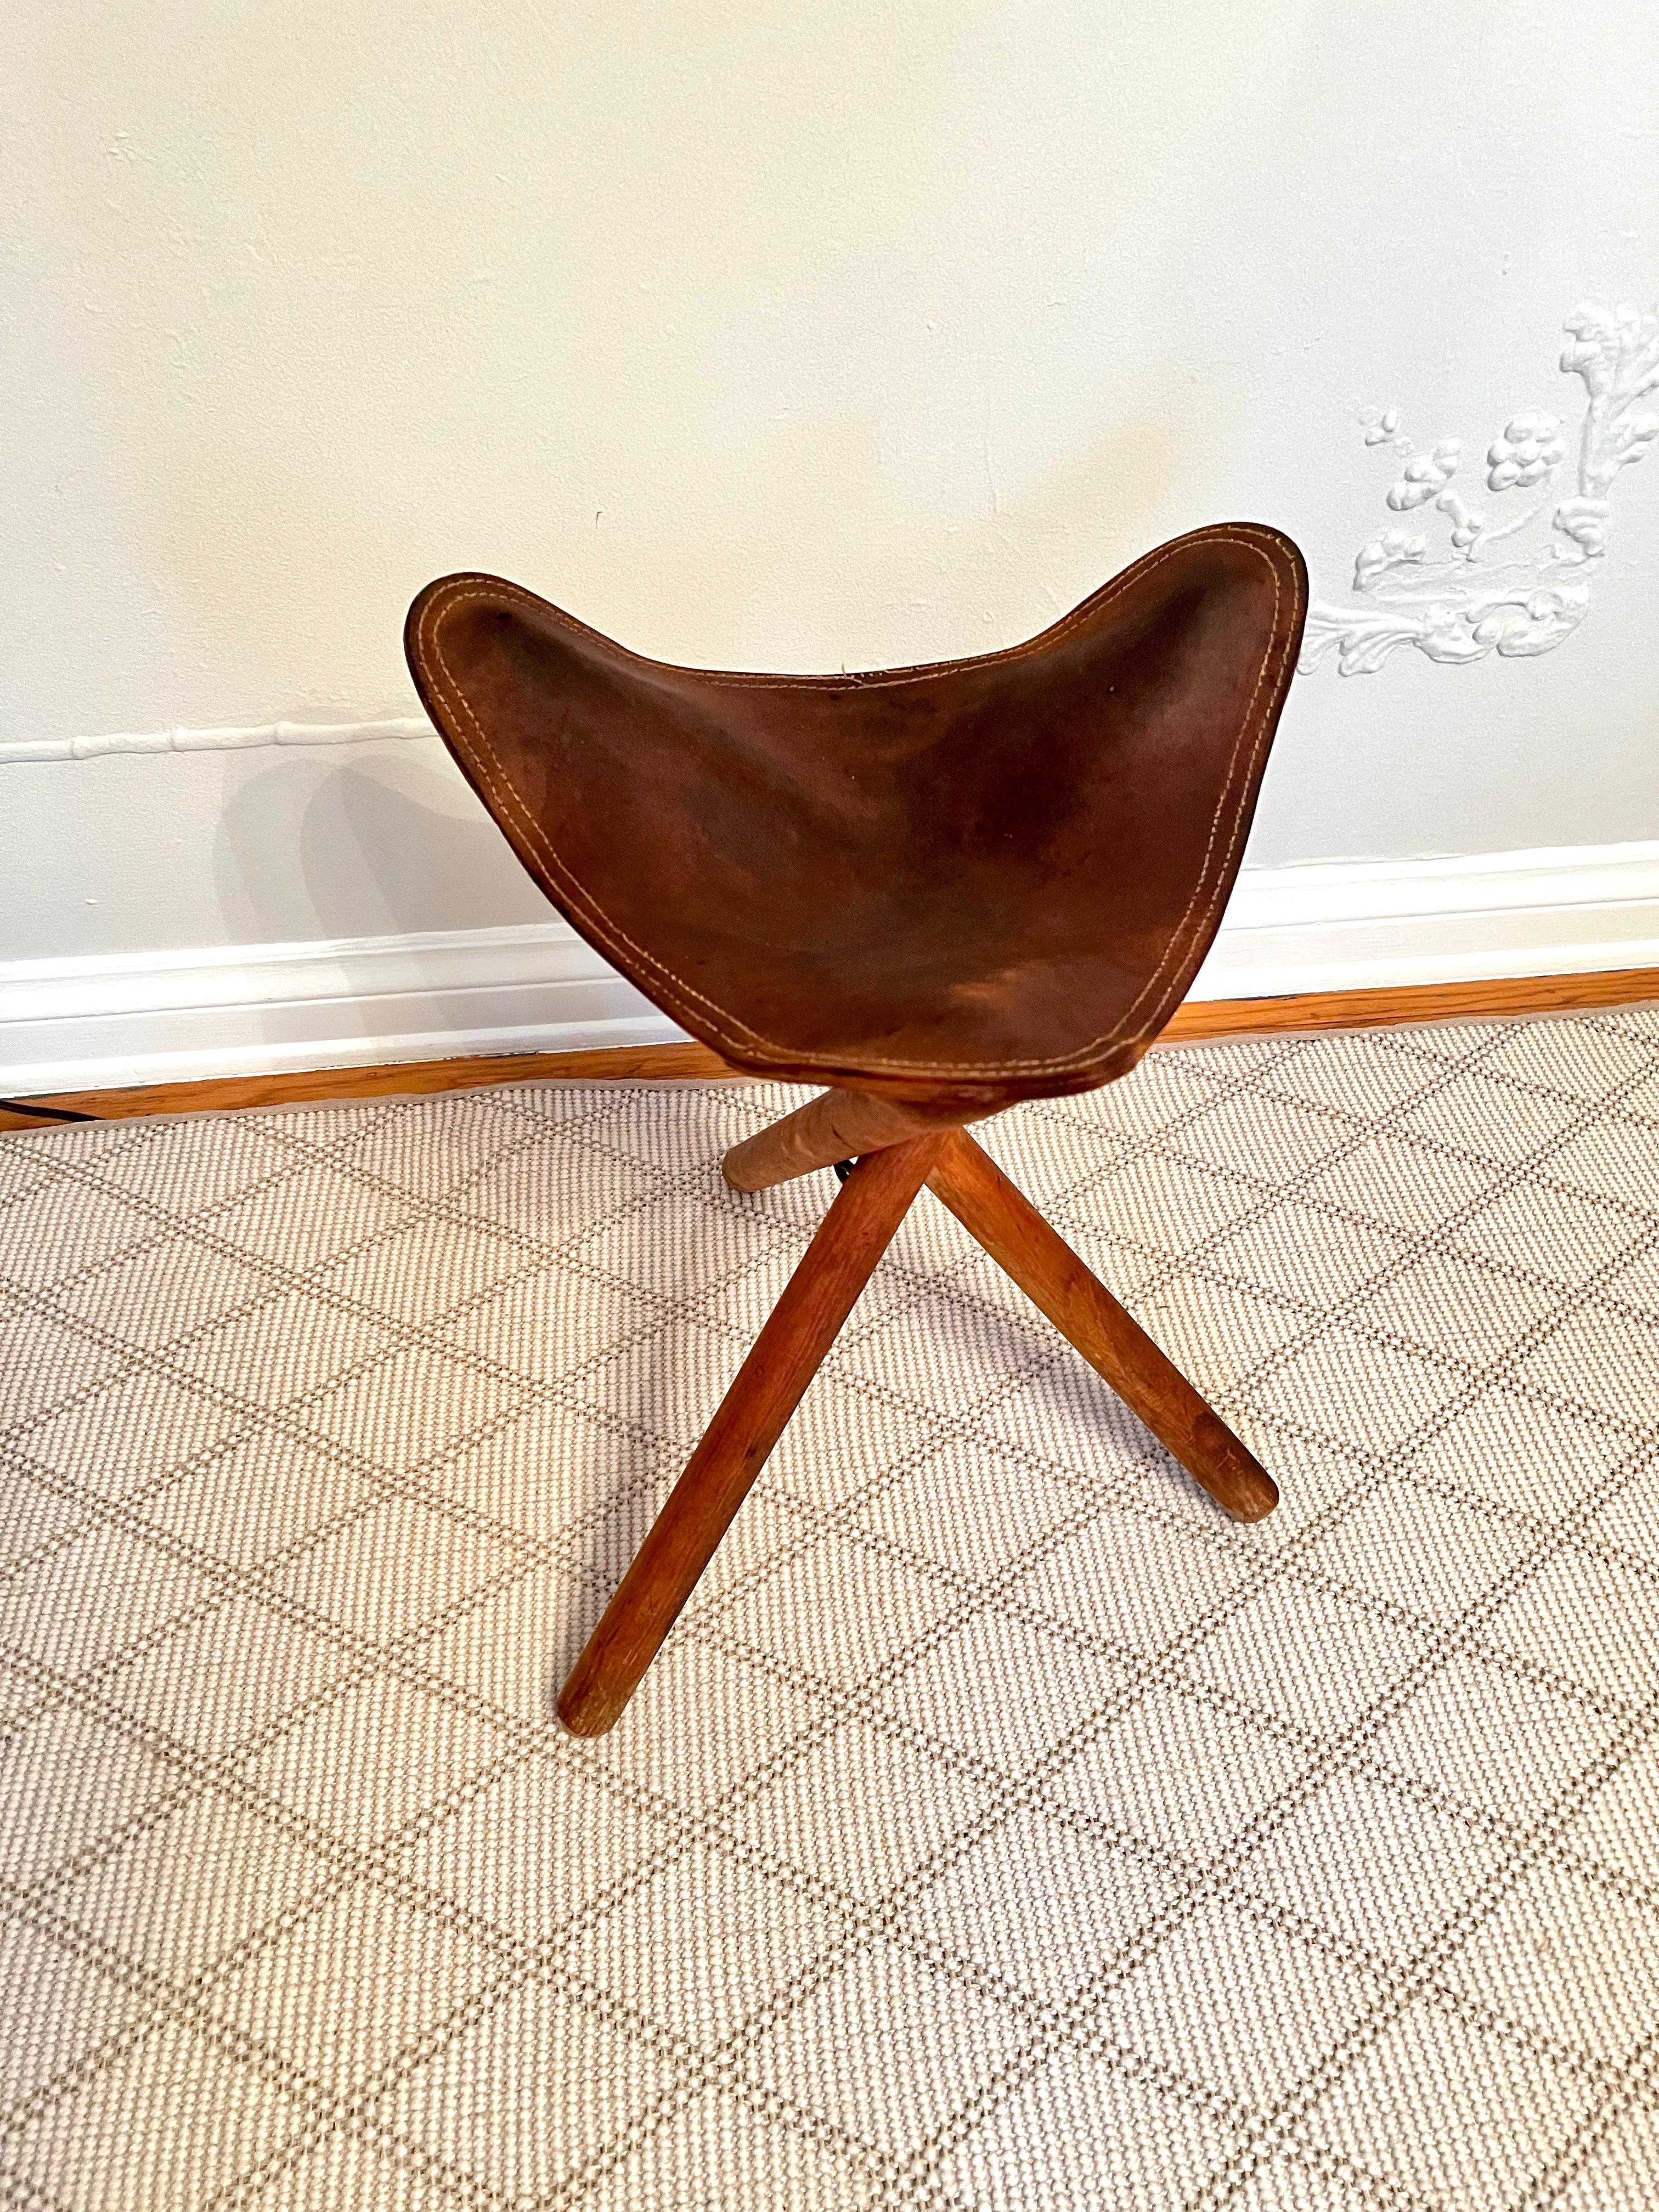 Tipod Leg Wooden Stool with Leather Seat 3